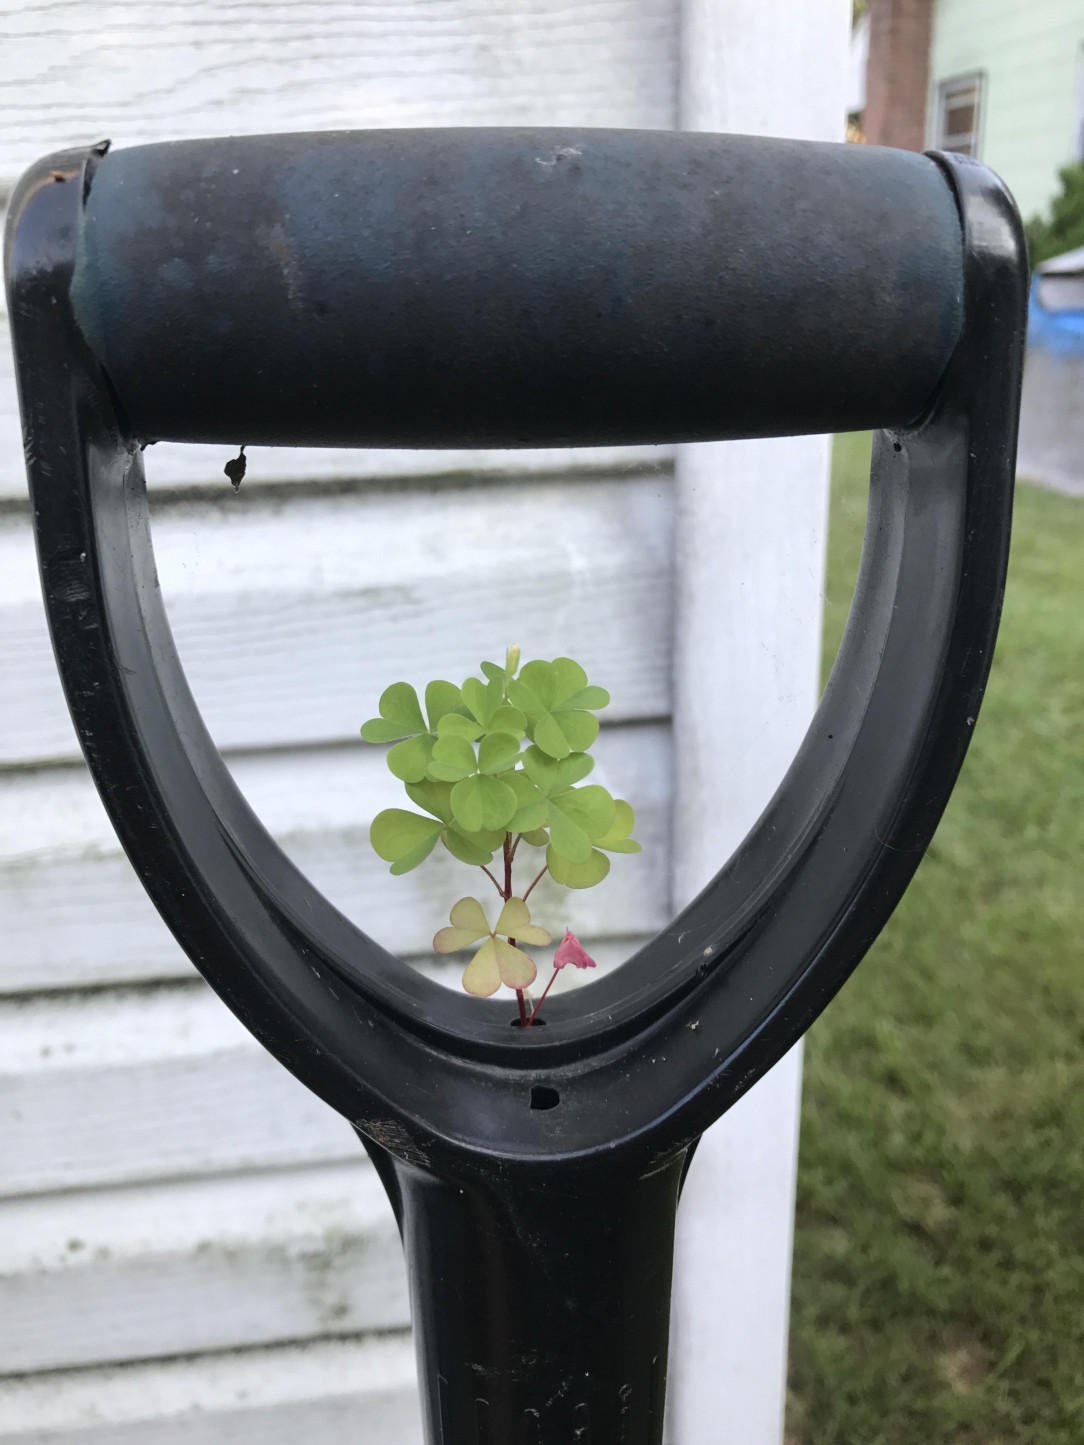 This weed growing in this shovel handle